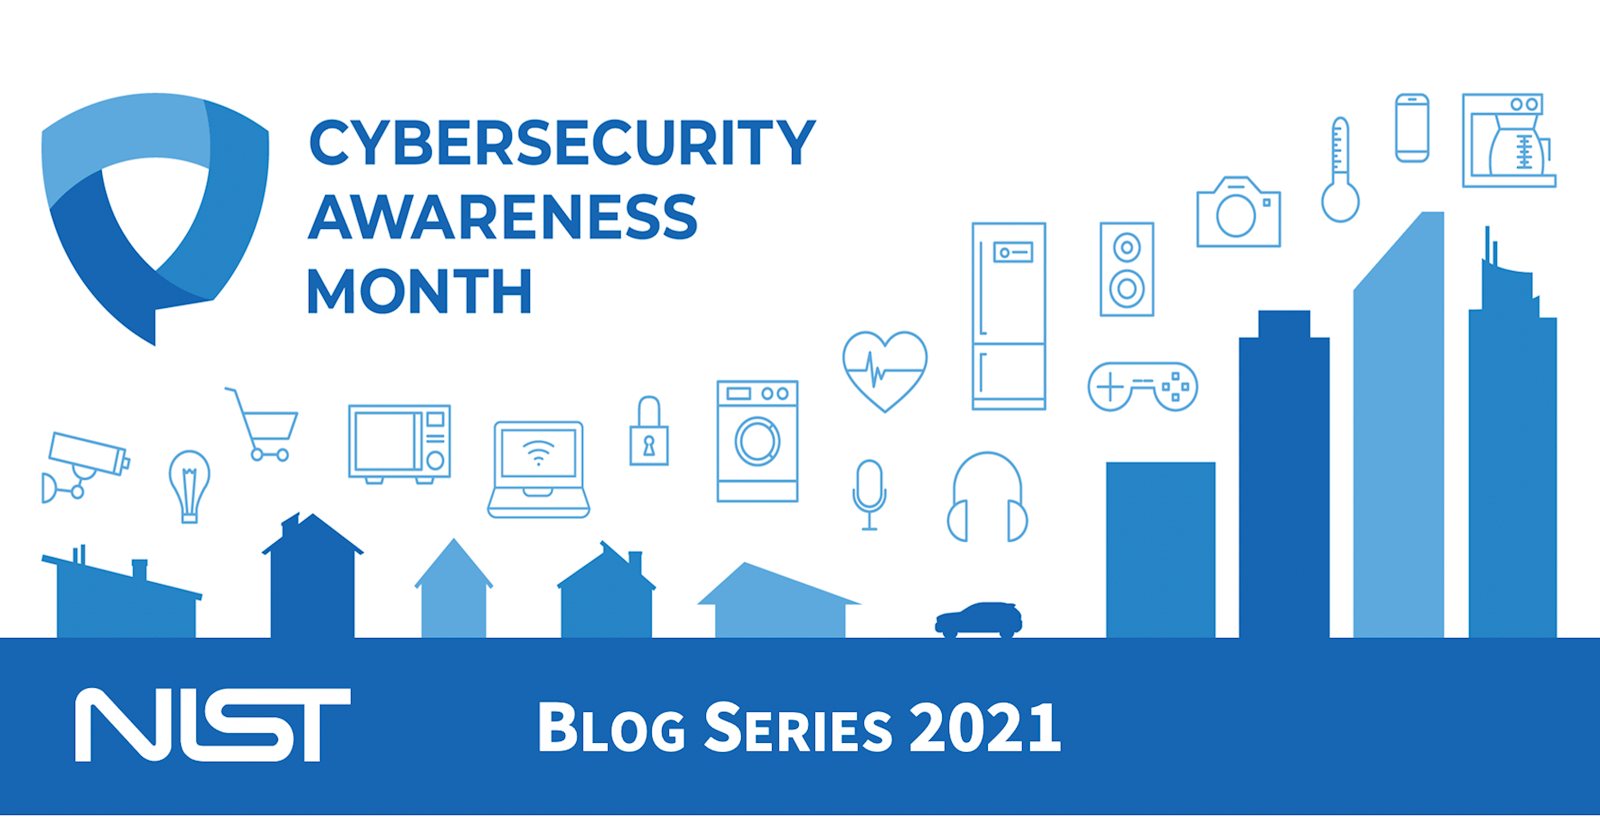 cybersecurity awareness month image